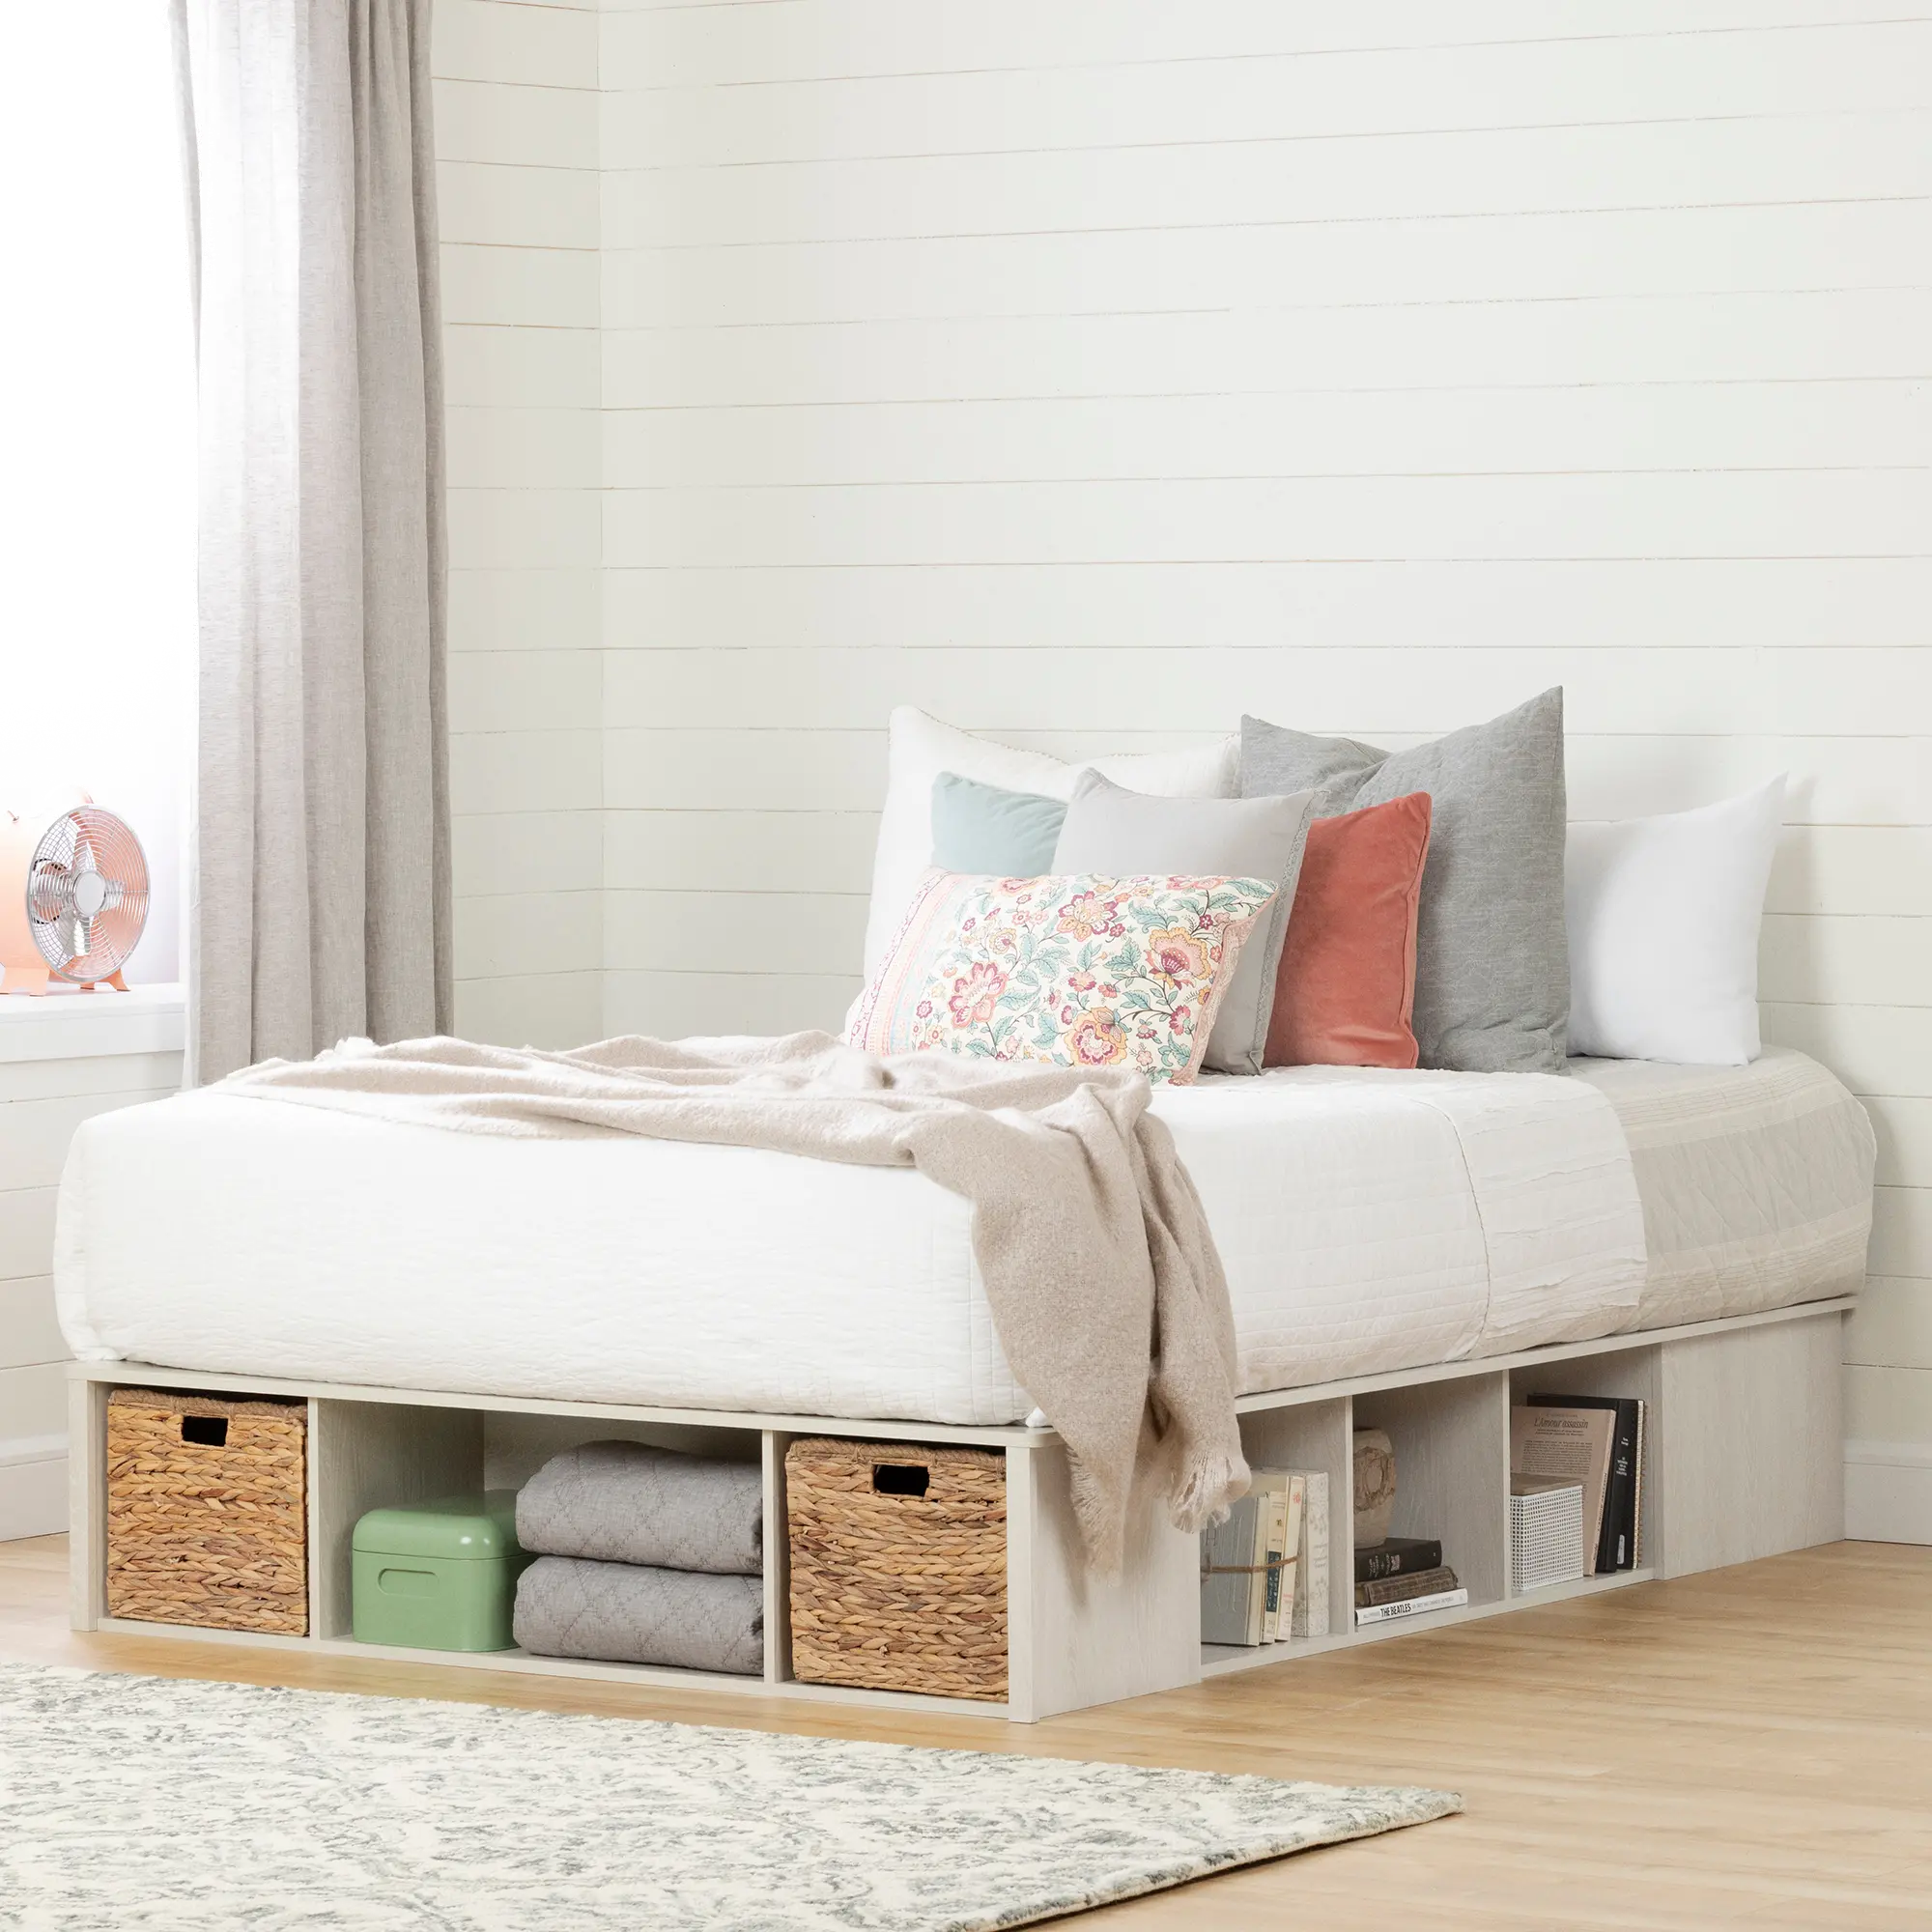 Lilak Winter Oak White Queen Storage Bed with Baskets - South Shore